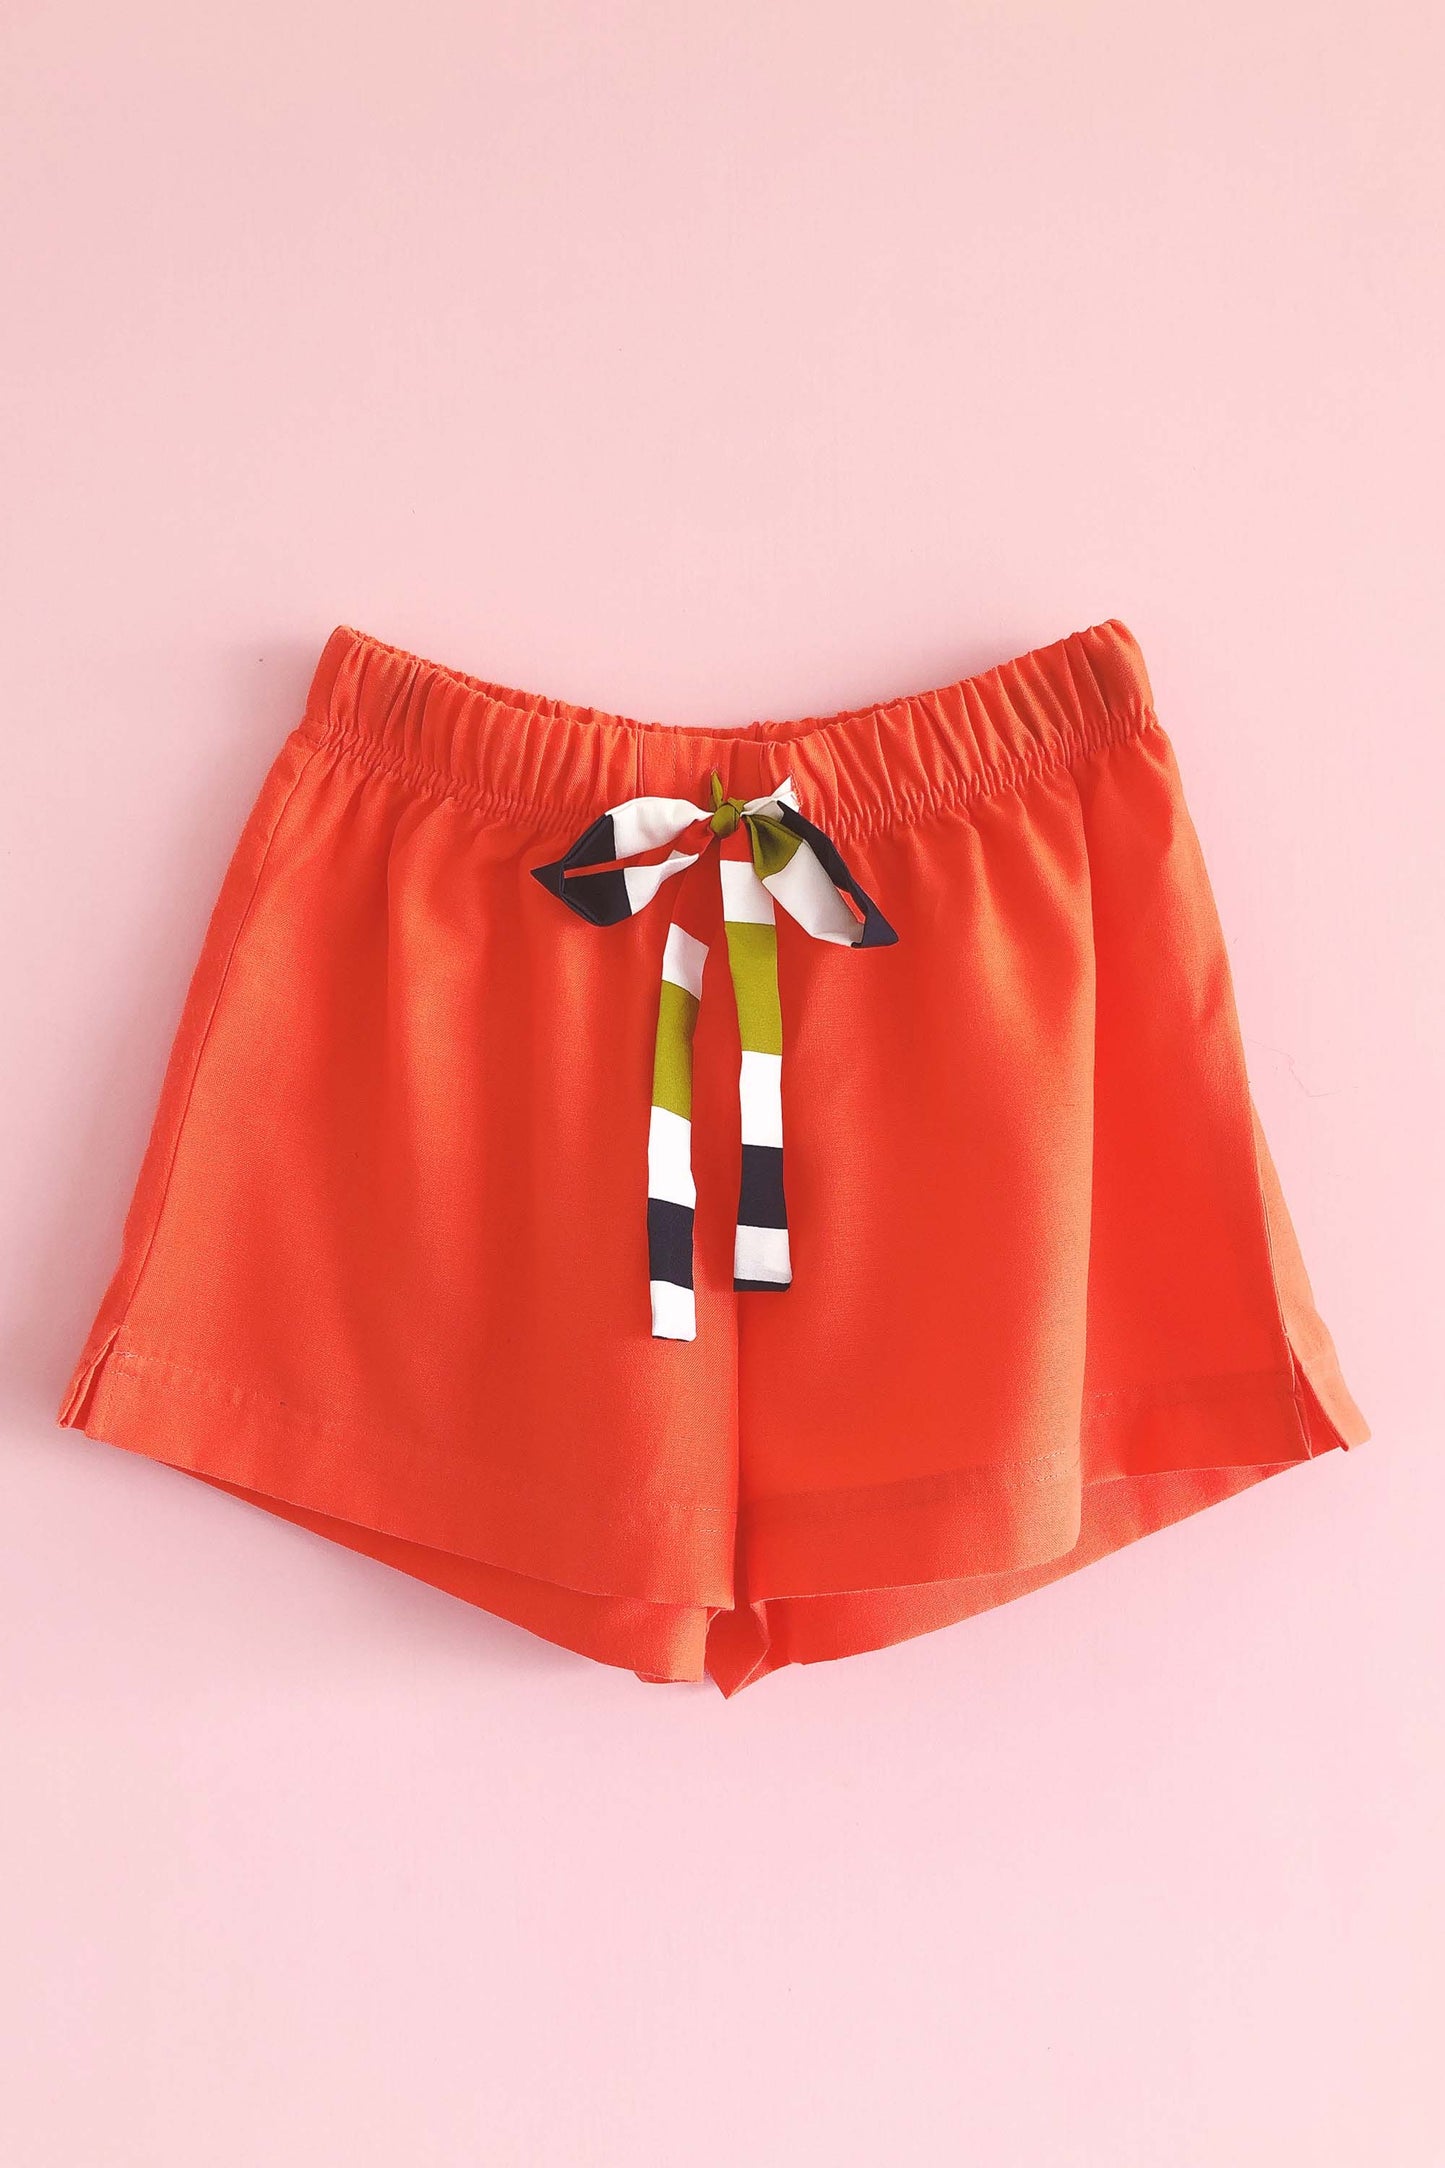 Women's Crepe Shorts Combo (Pack of 2) - Peppy Stripes and Orange